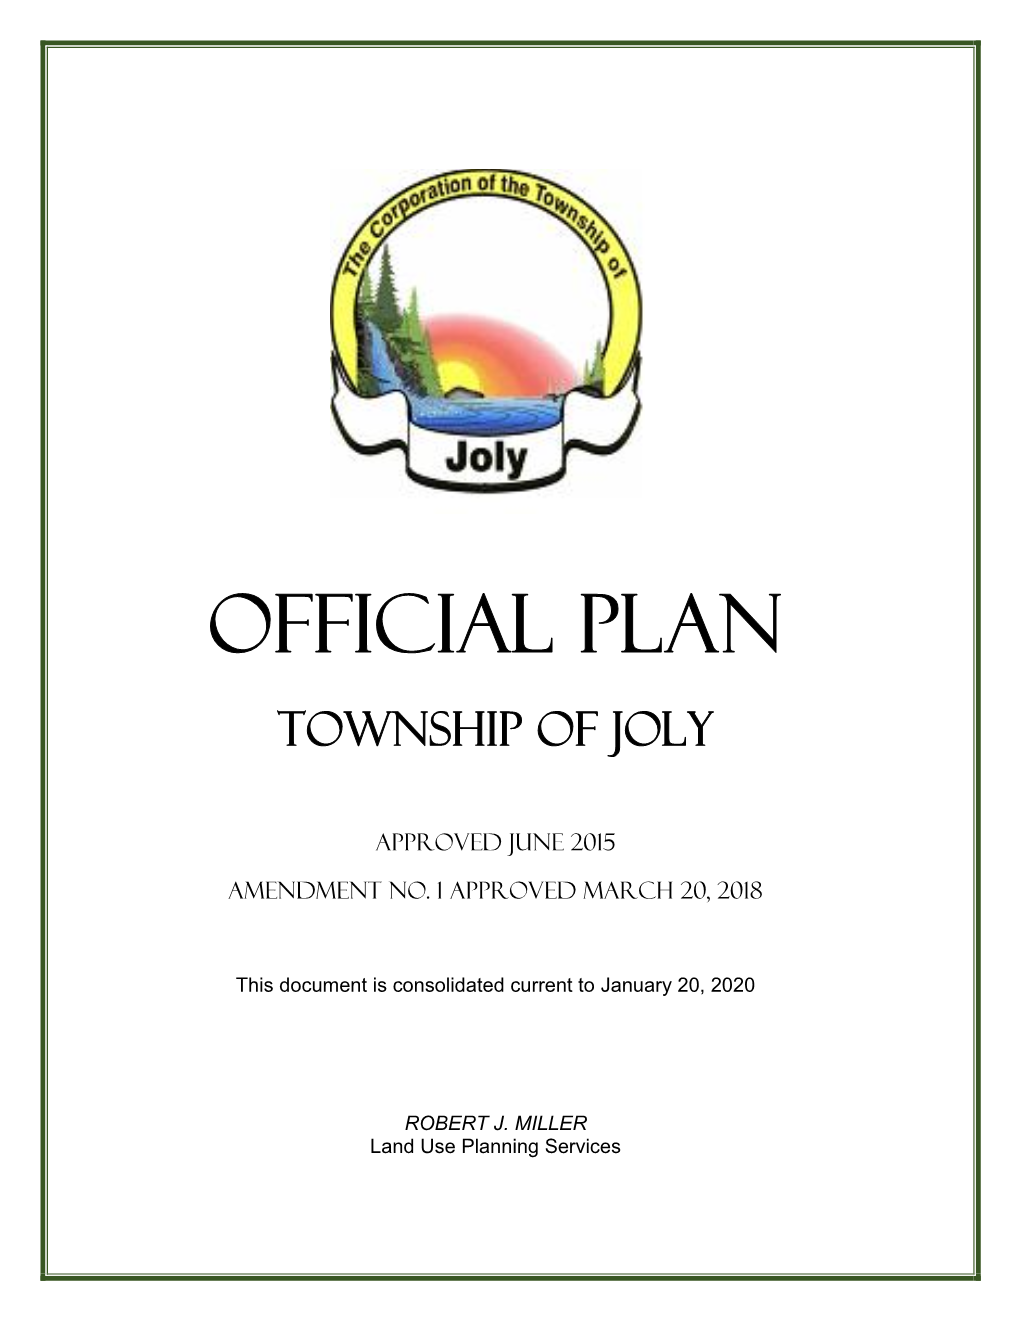 Official Plan Township of Joly